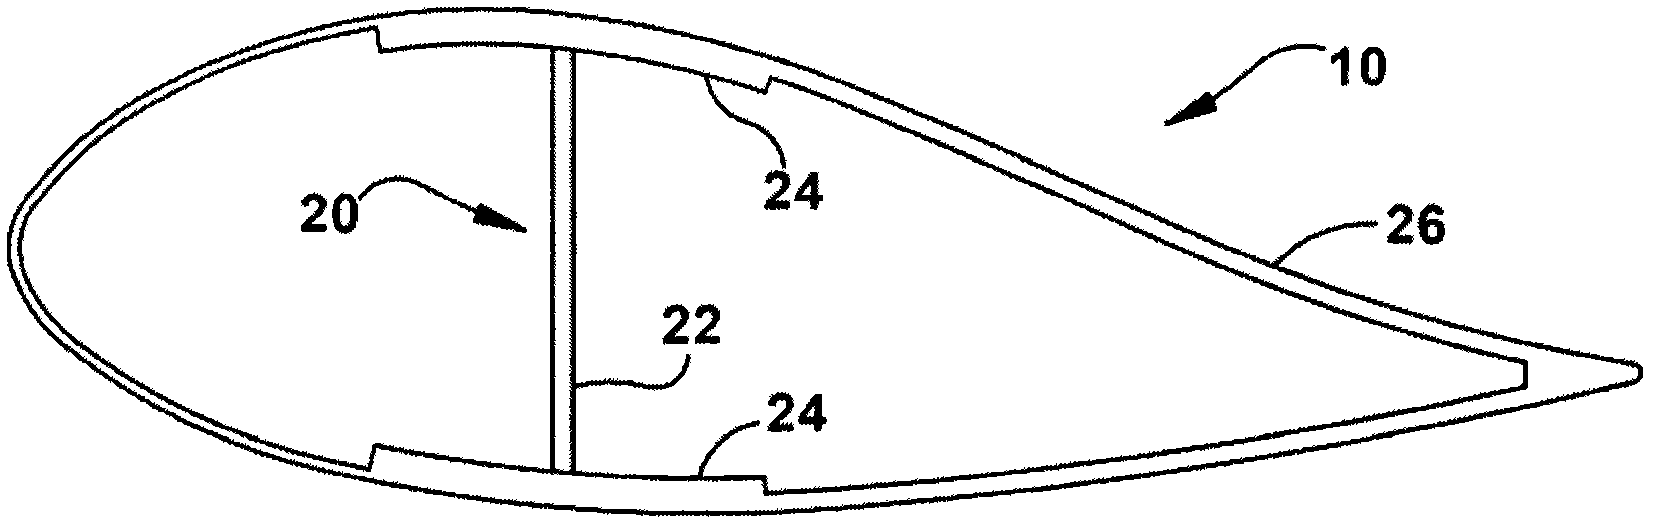 Methods of manufacture of wind turbine blades and other structures